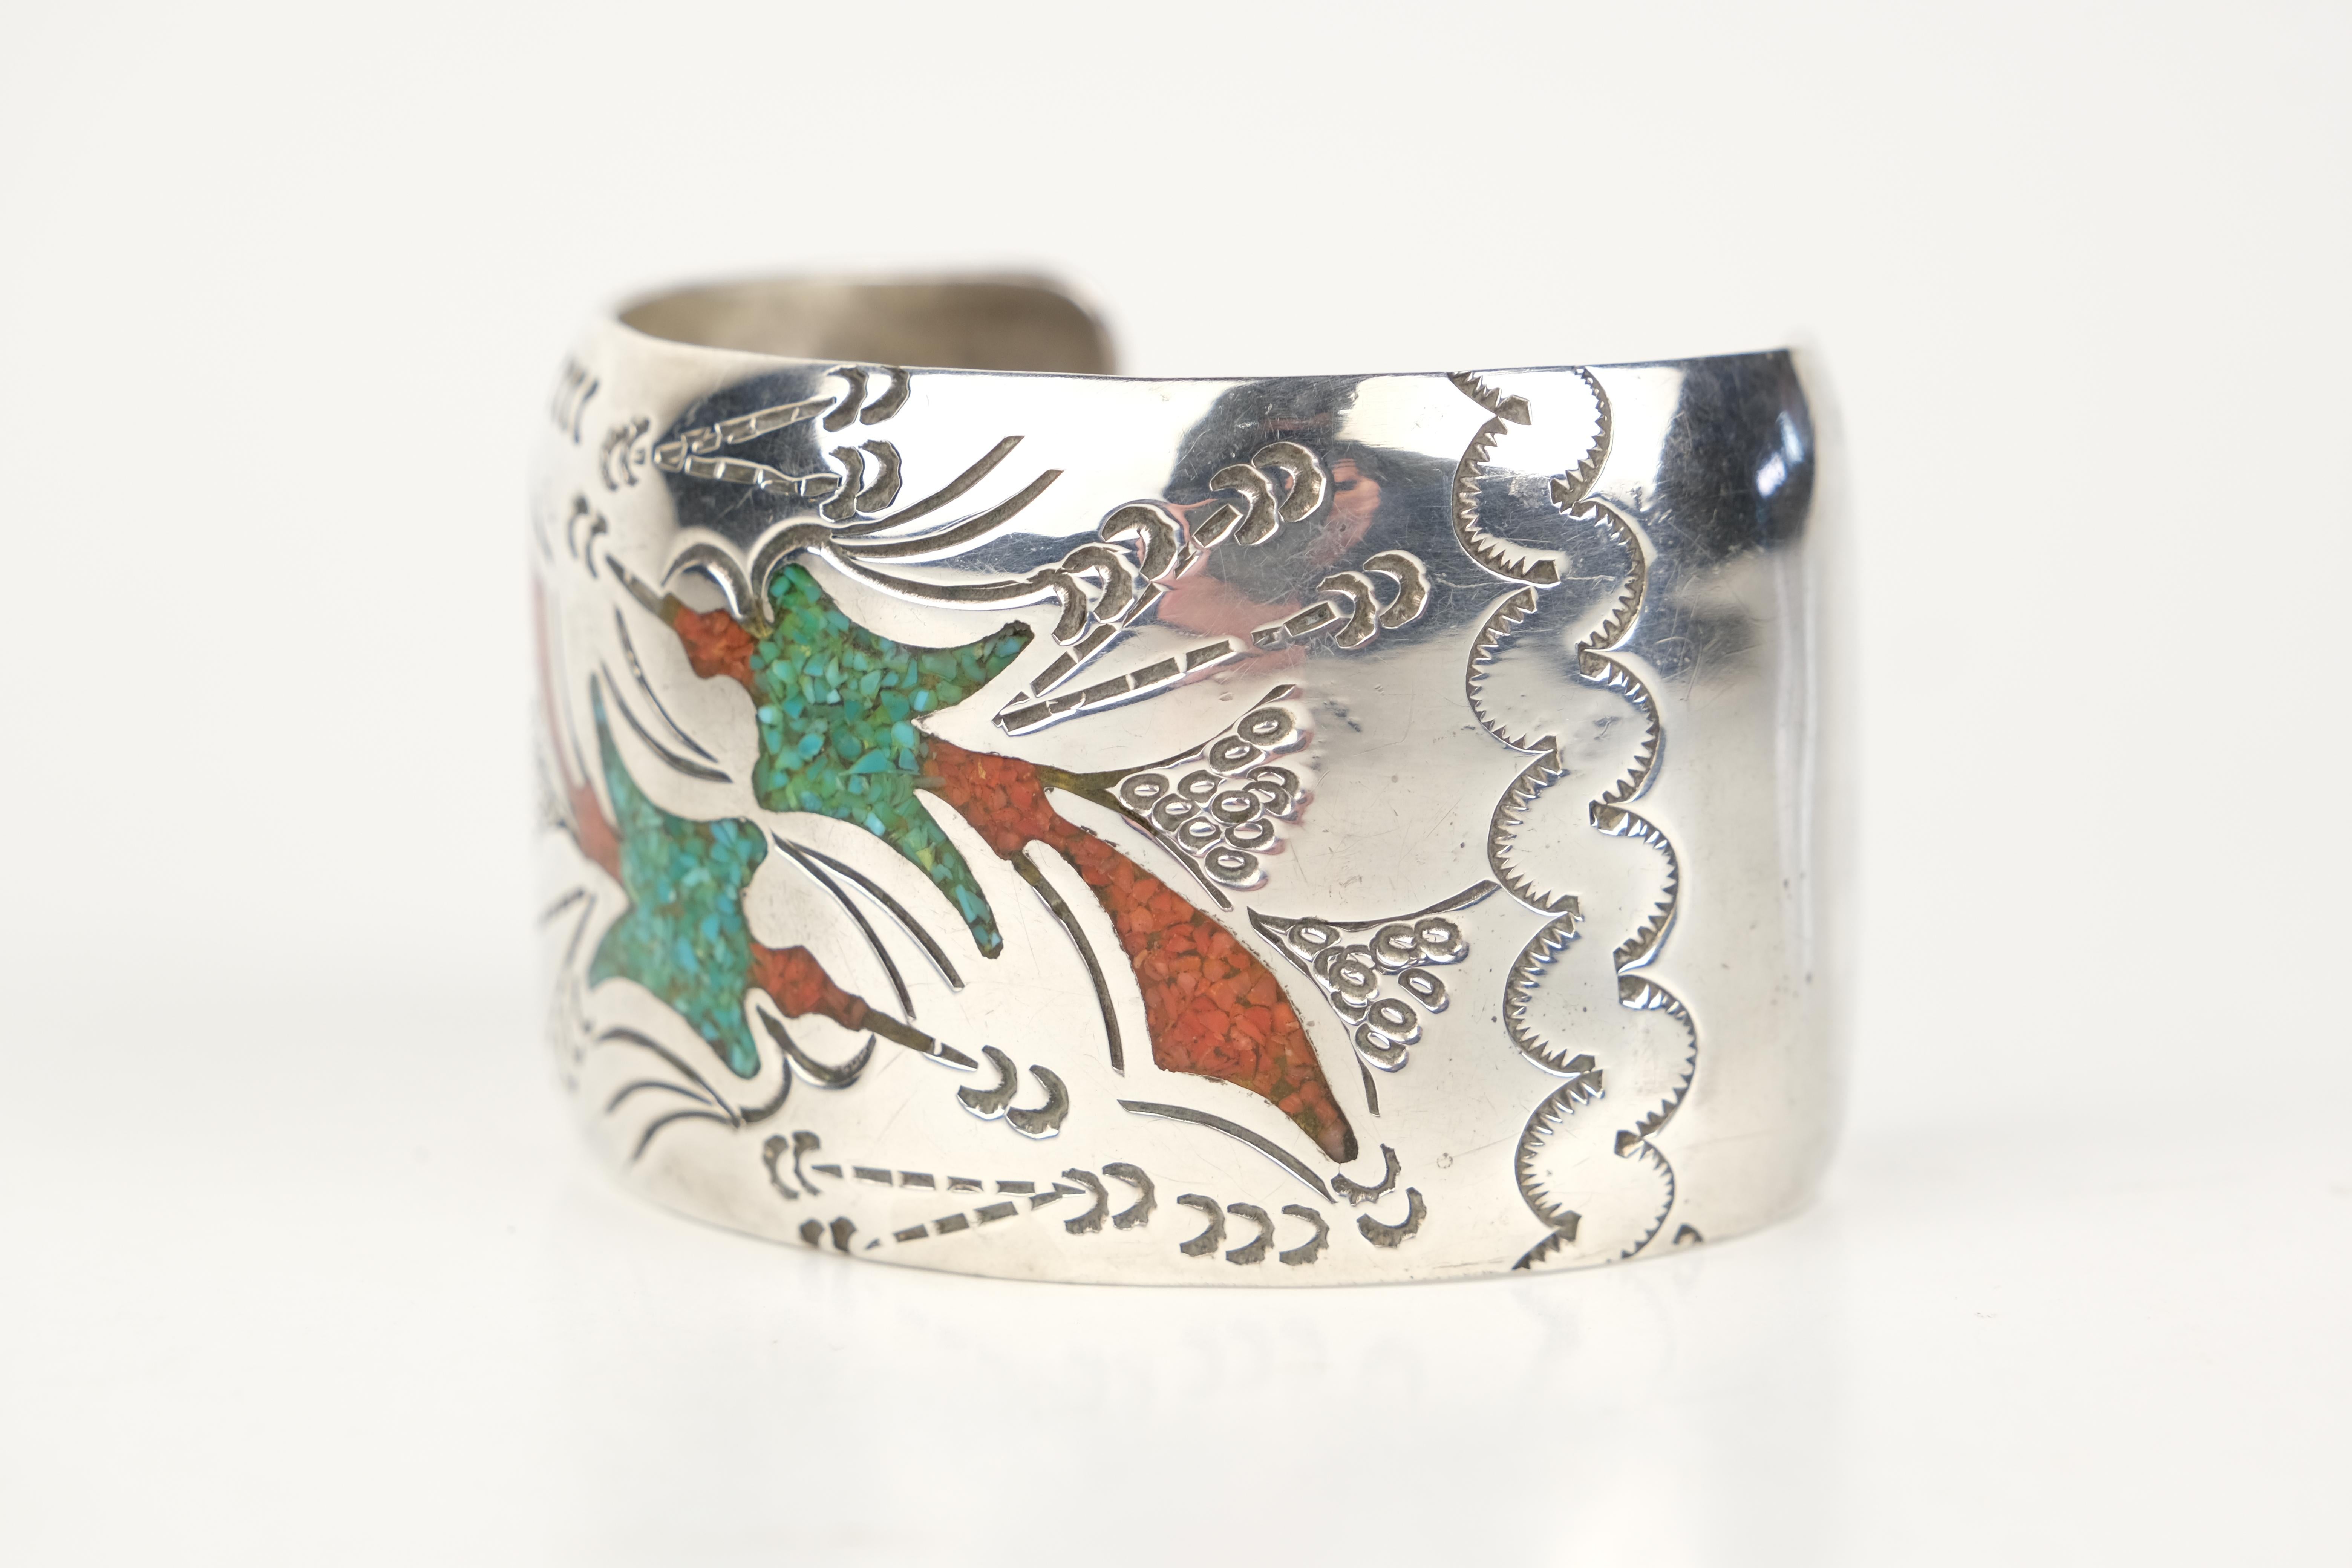 Western Style Sterling Turquoise and Coral Inlay Cuff

ITEM DETAILS
Materials: Sterling Silver
Bracelet Length: 5.00